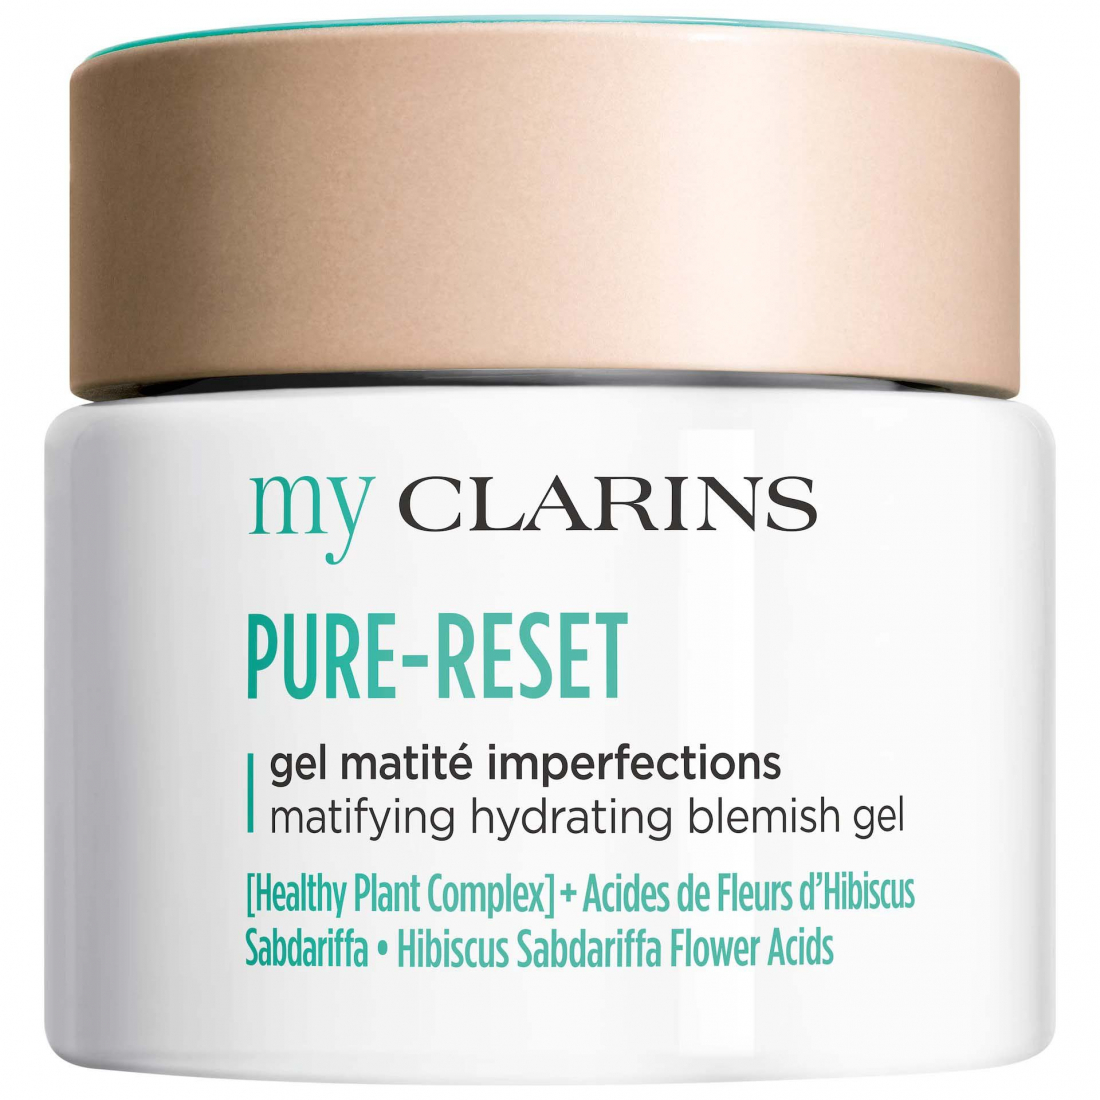 Traitement des imperfections 'MyClarins Pure-Reset Matifying Hydrating' - 50 ml